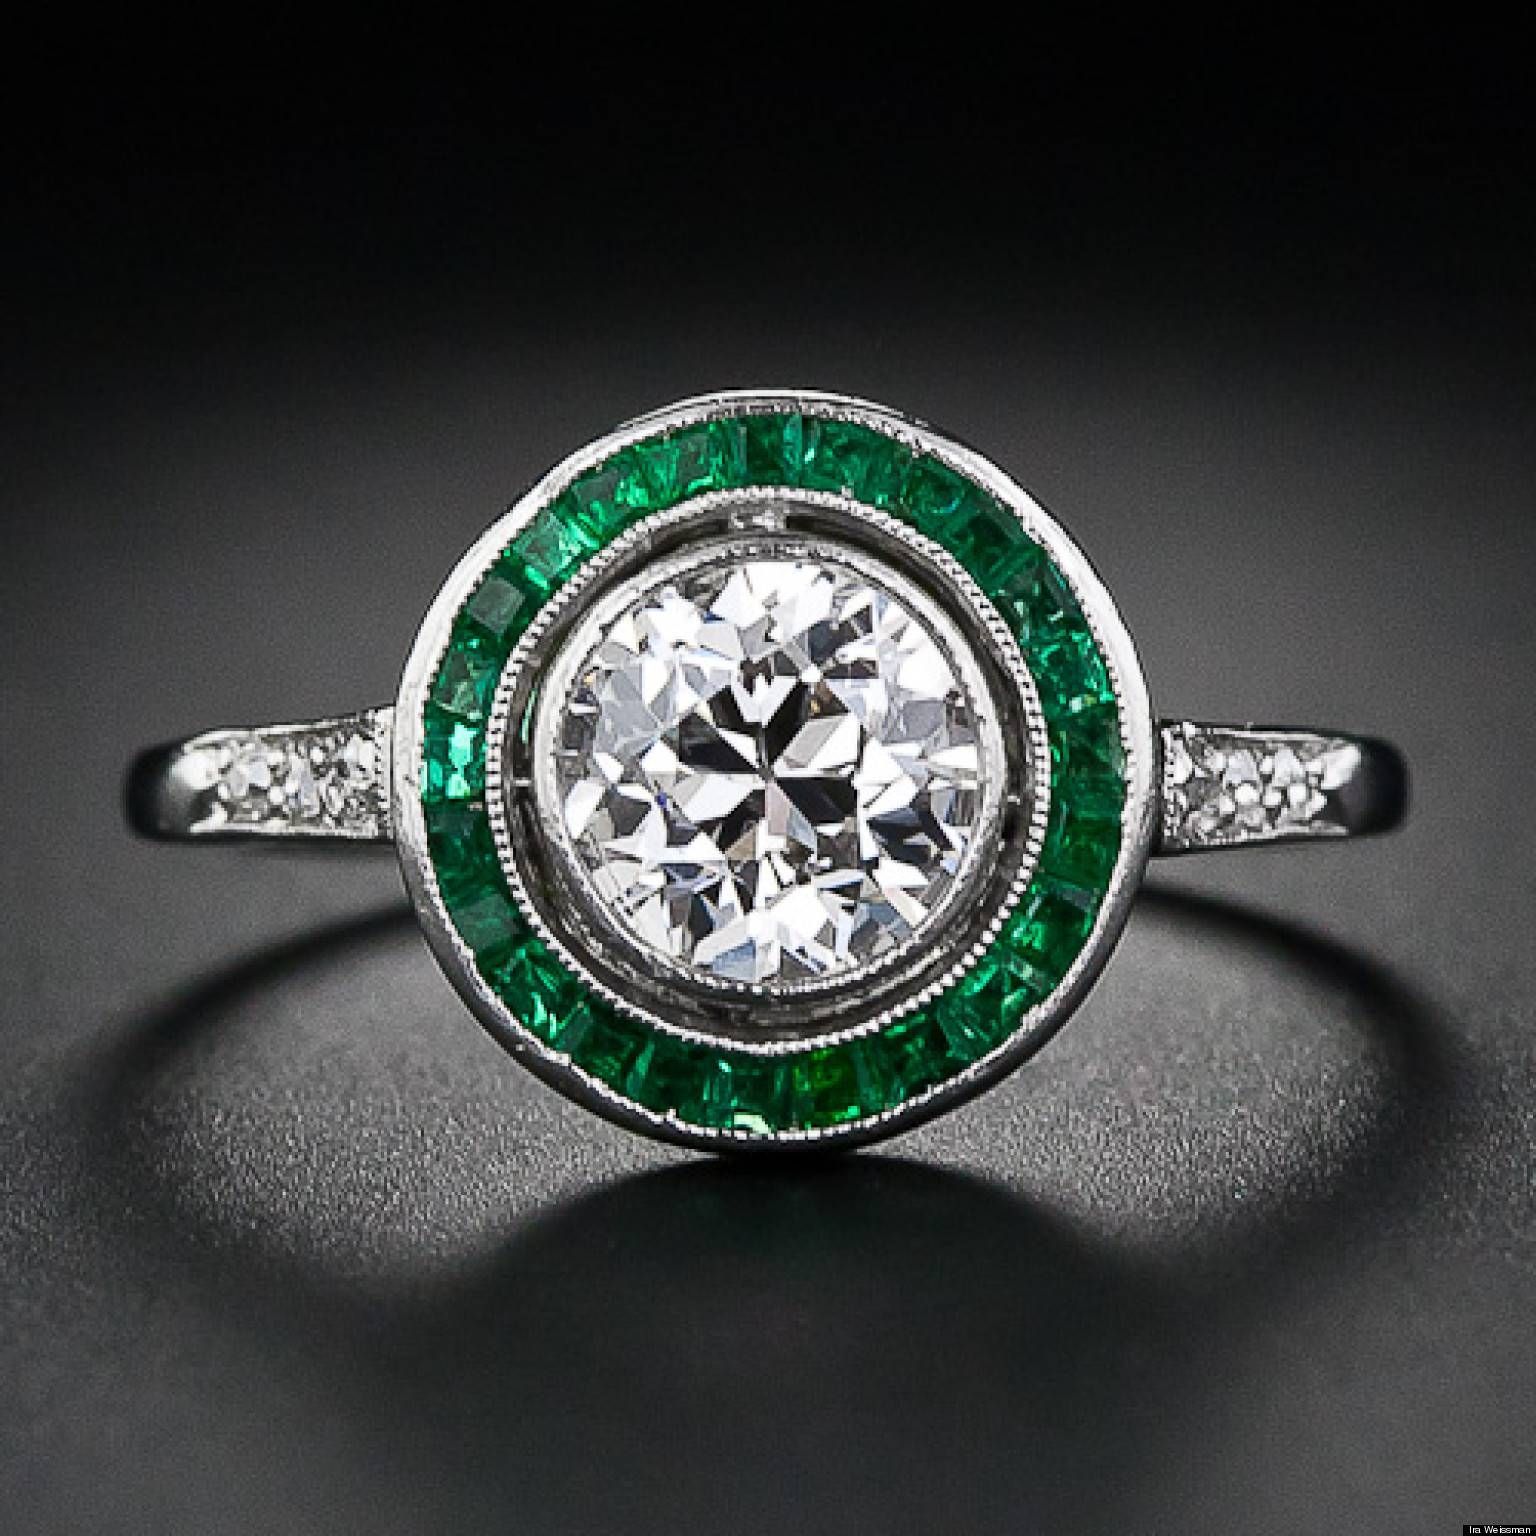 Wedding Rings : Emerald Engagment Rings Engagement Ring With Intended For Engagement Rings Emeralds (View 7 of 15)